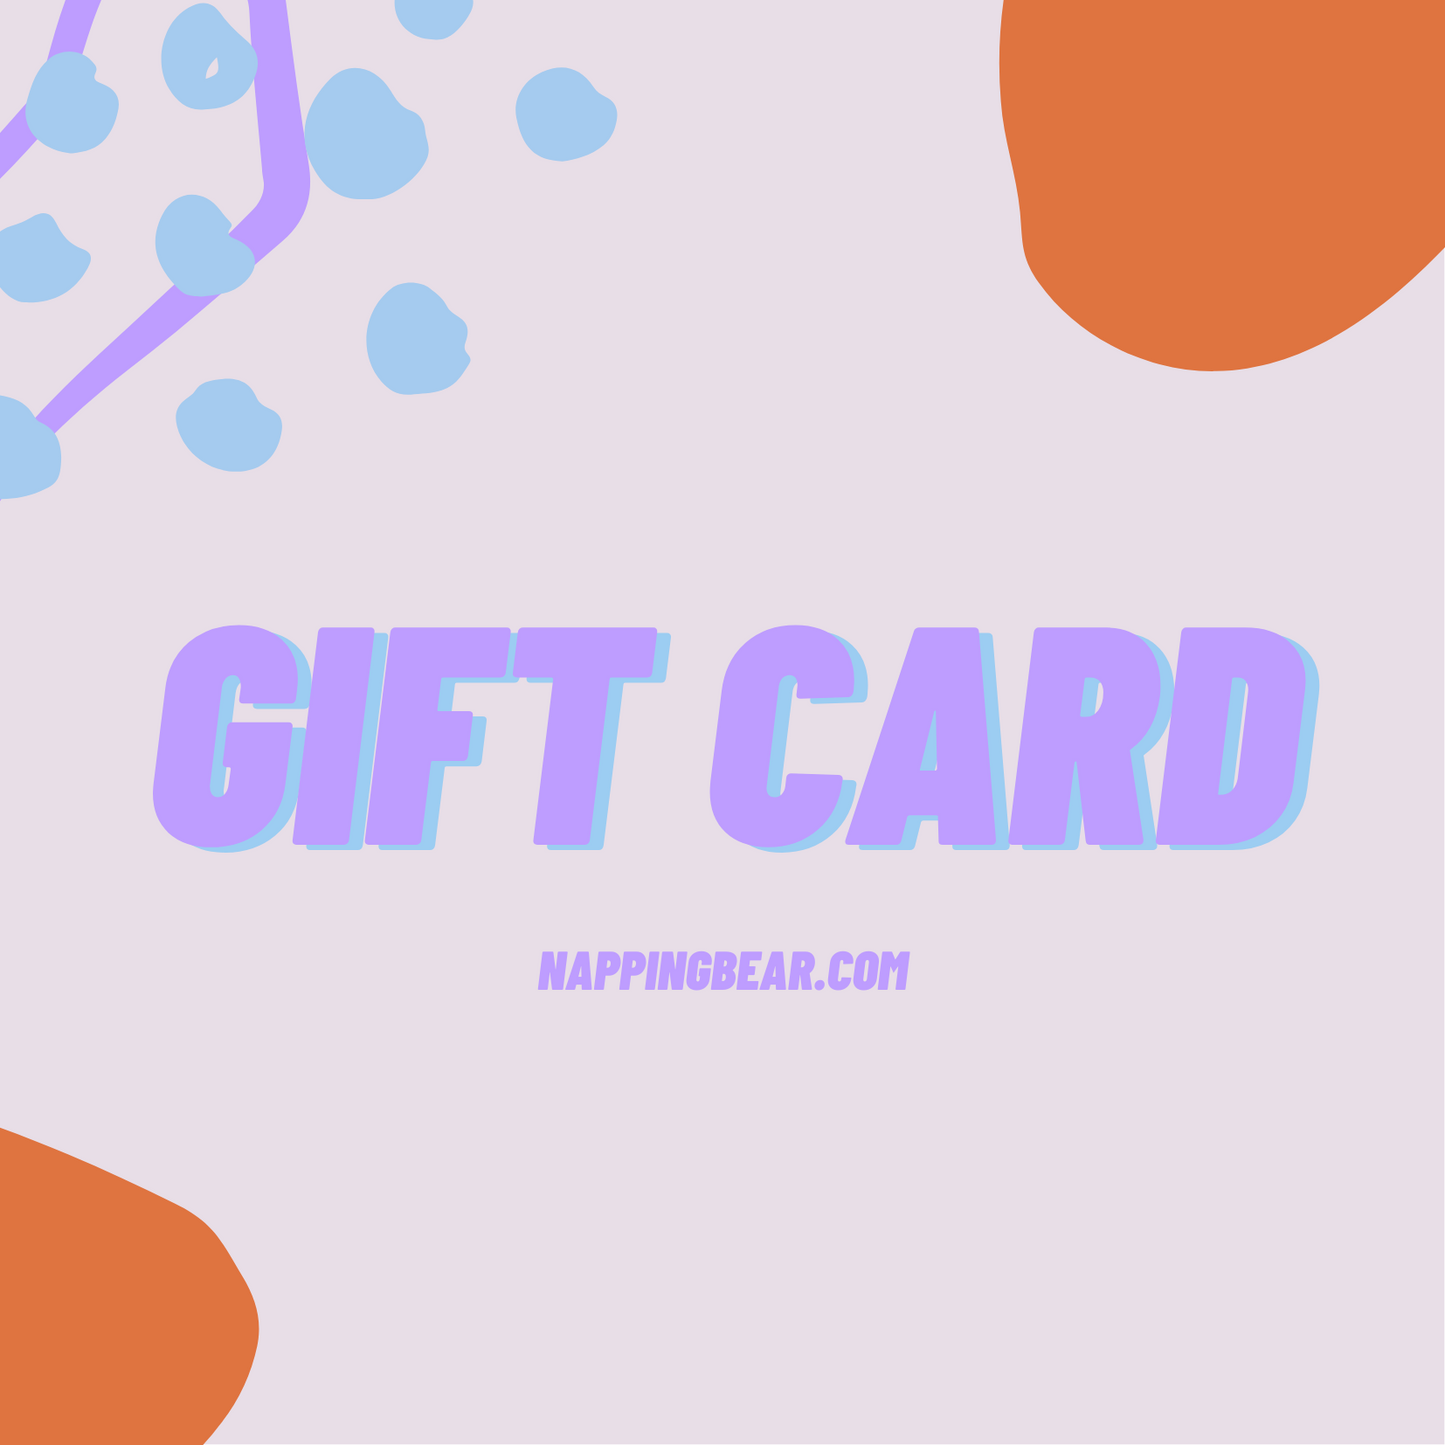 Napping Bear gift card (a digital one)